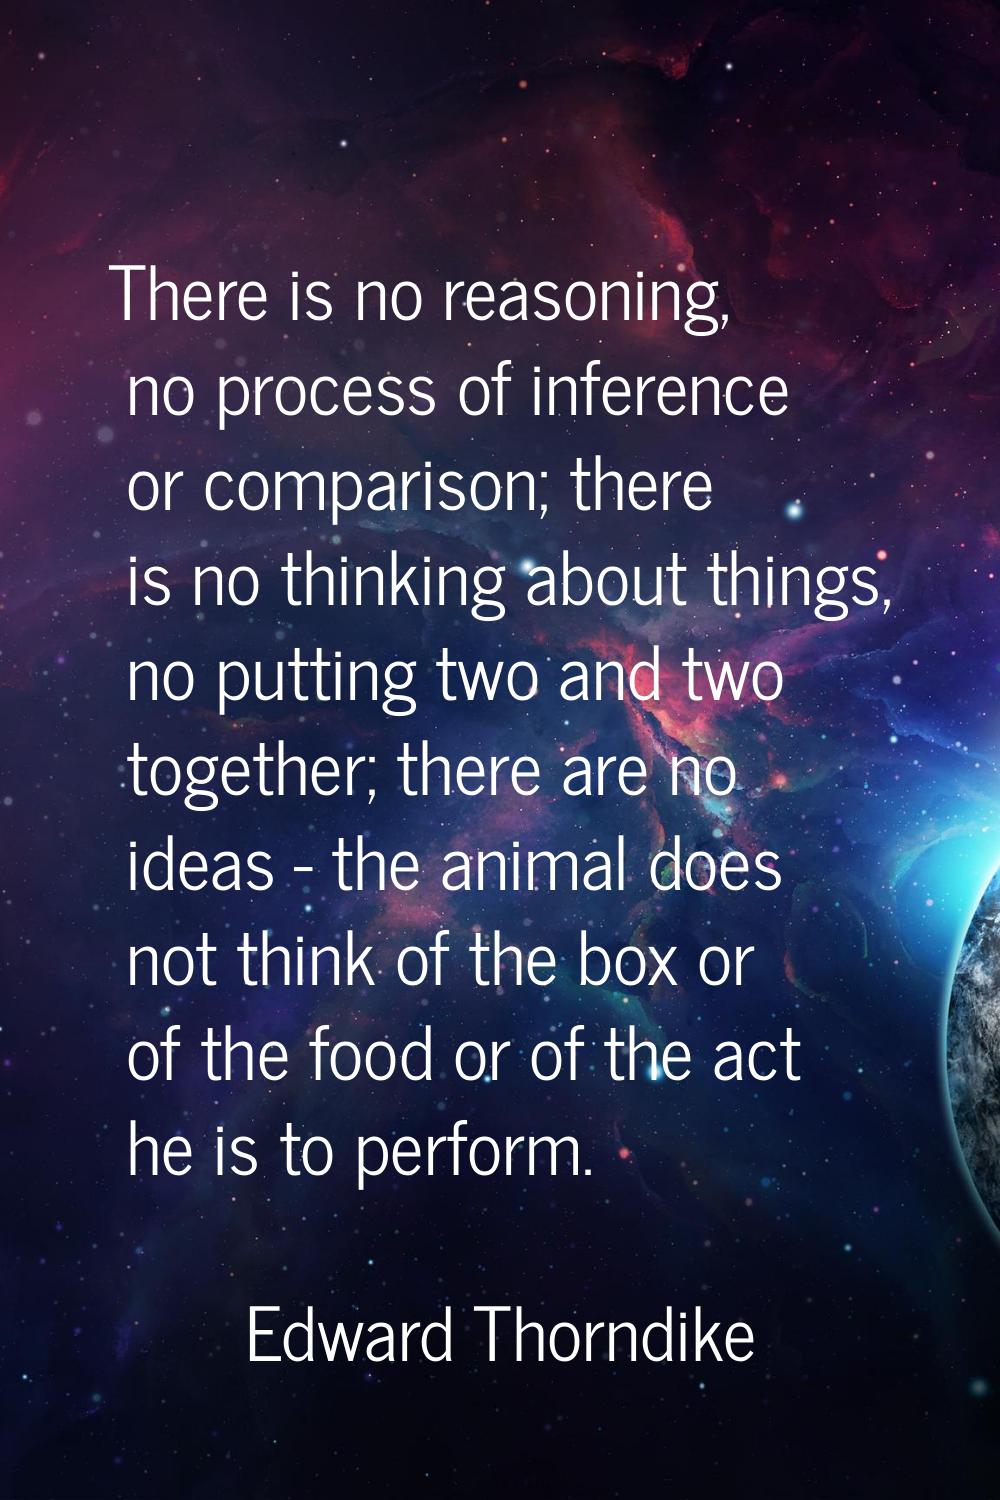 There is no reasoning, no process of inference or comparison; there is no thinking about things, no